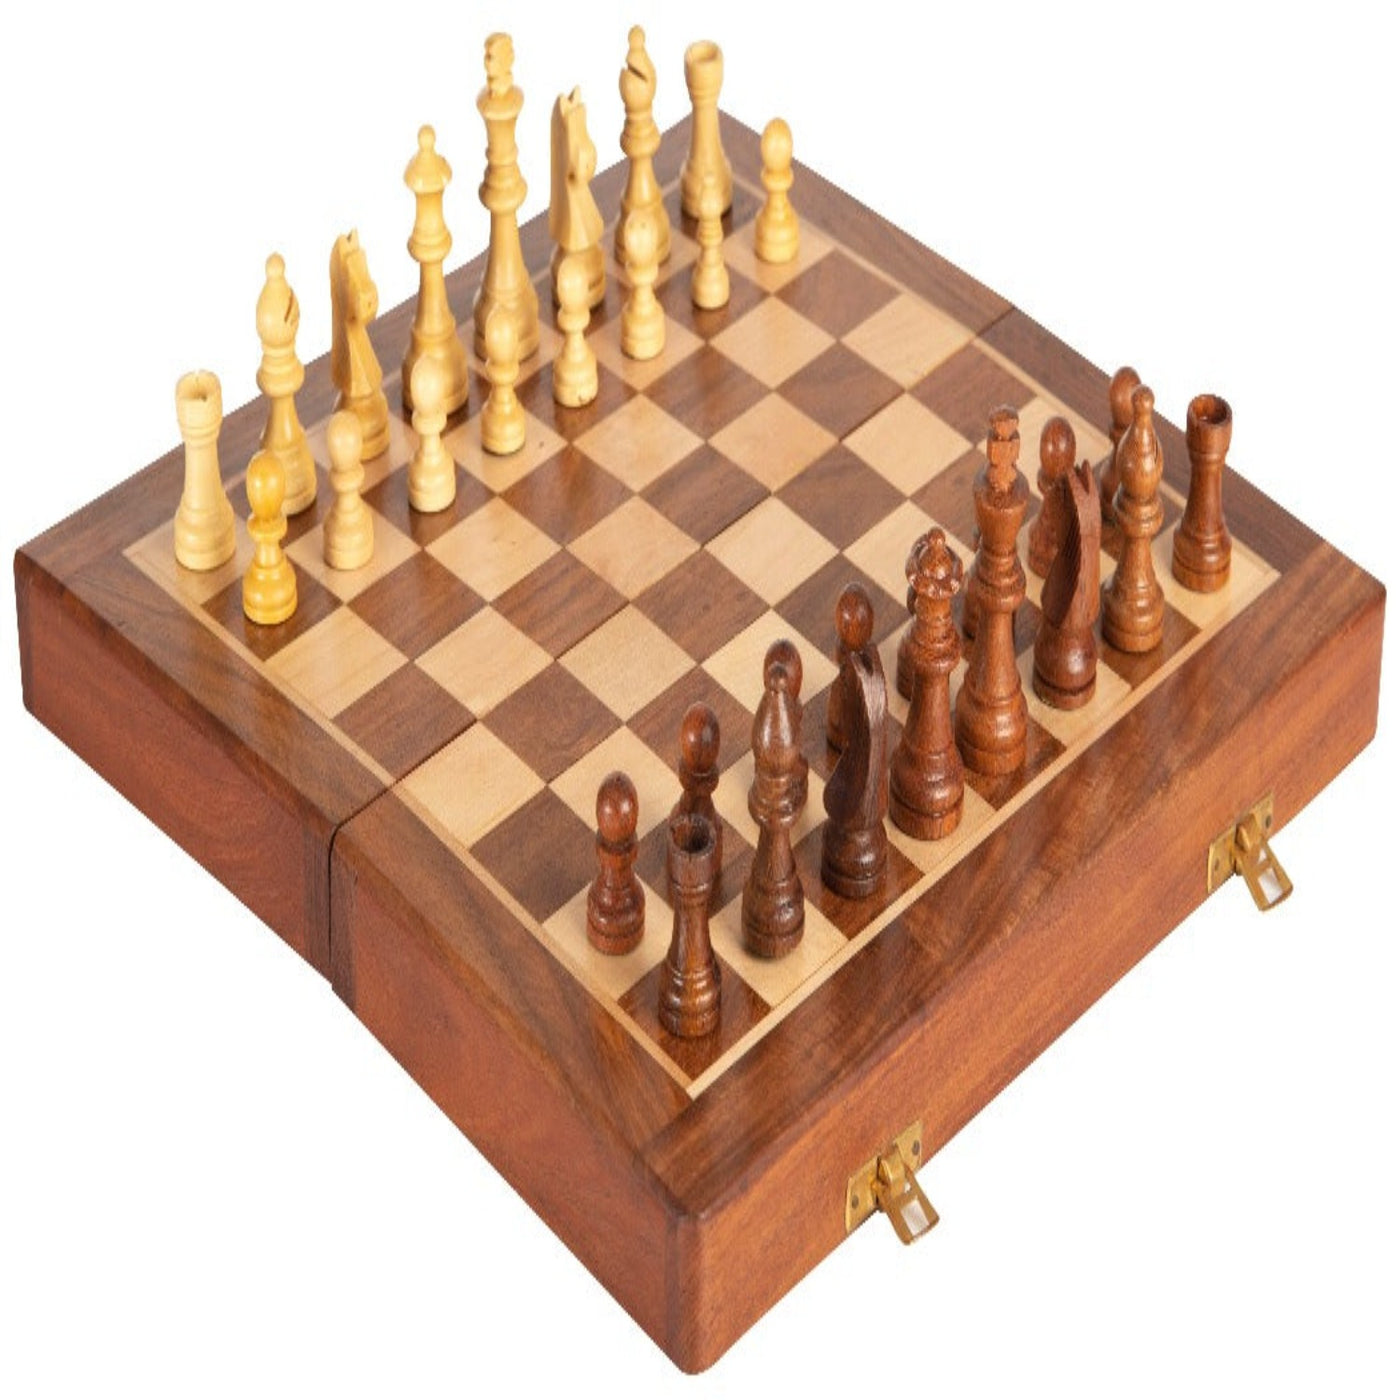 Wooden Chess board. best price 